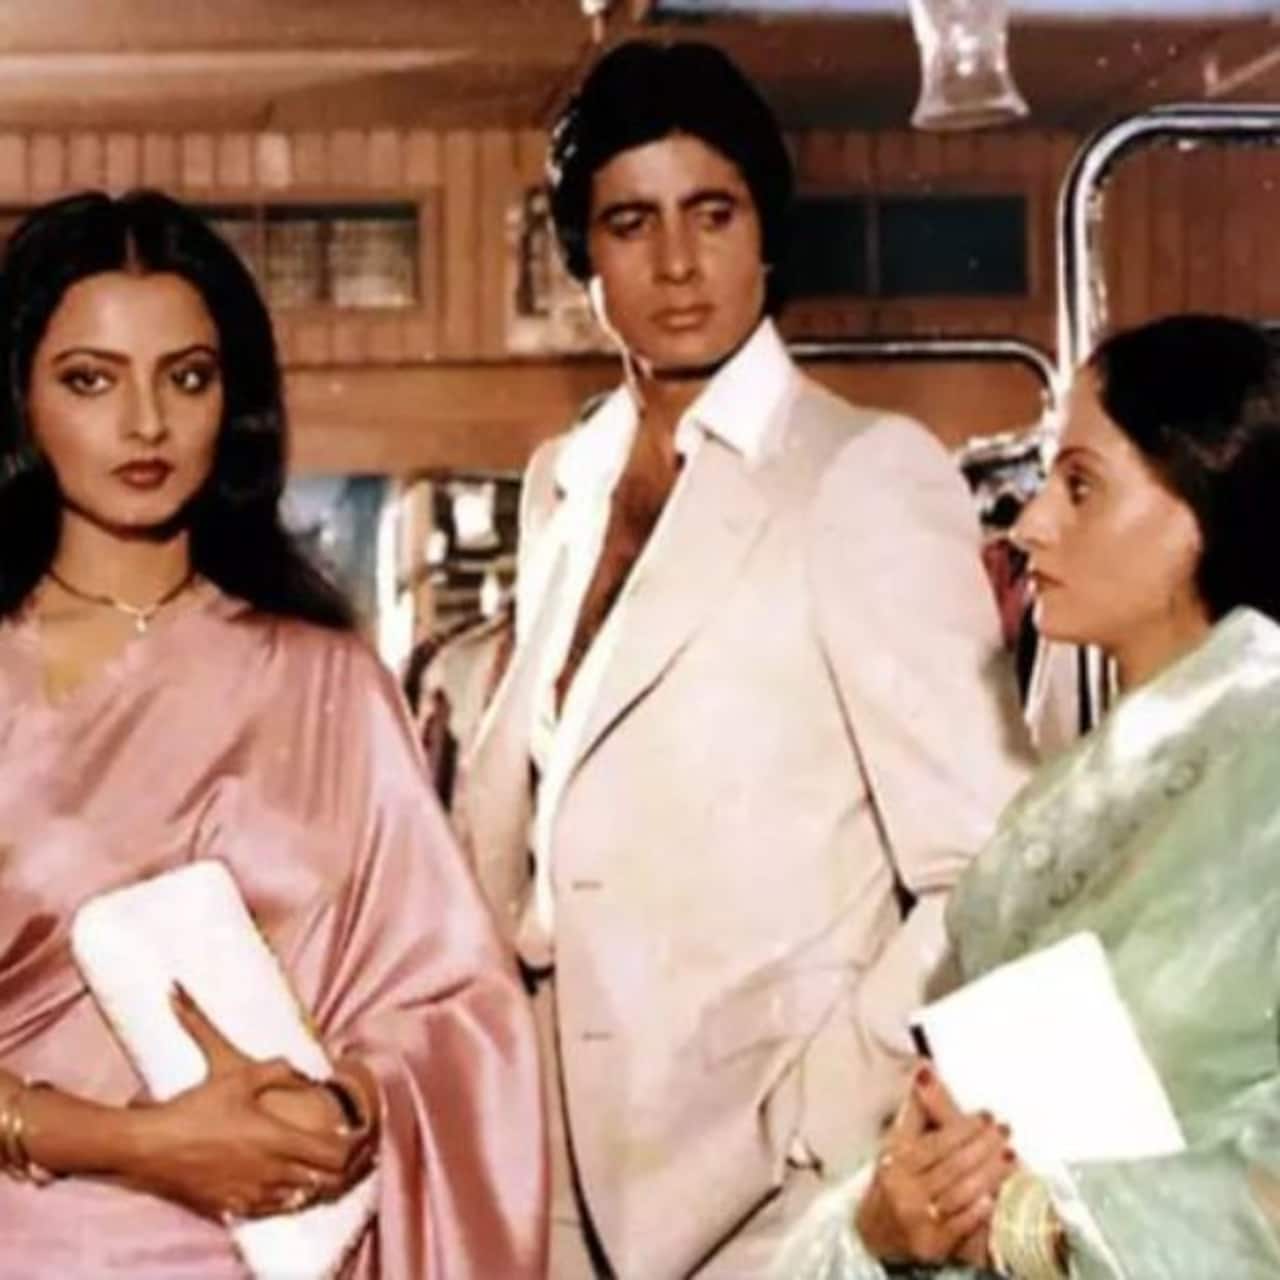 When Rekha revealed that Jaya Bachchan cried seeing her and Amitabh Bachchan romance each other on screen